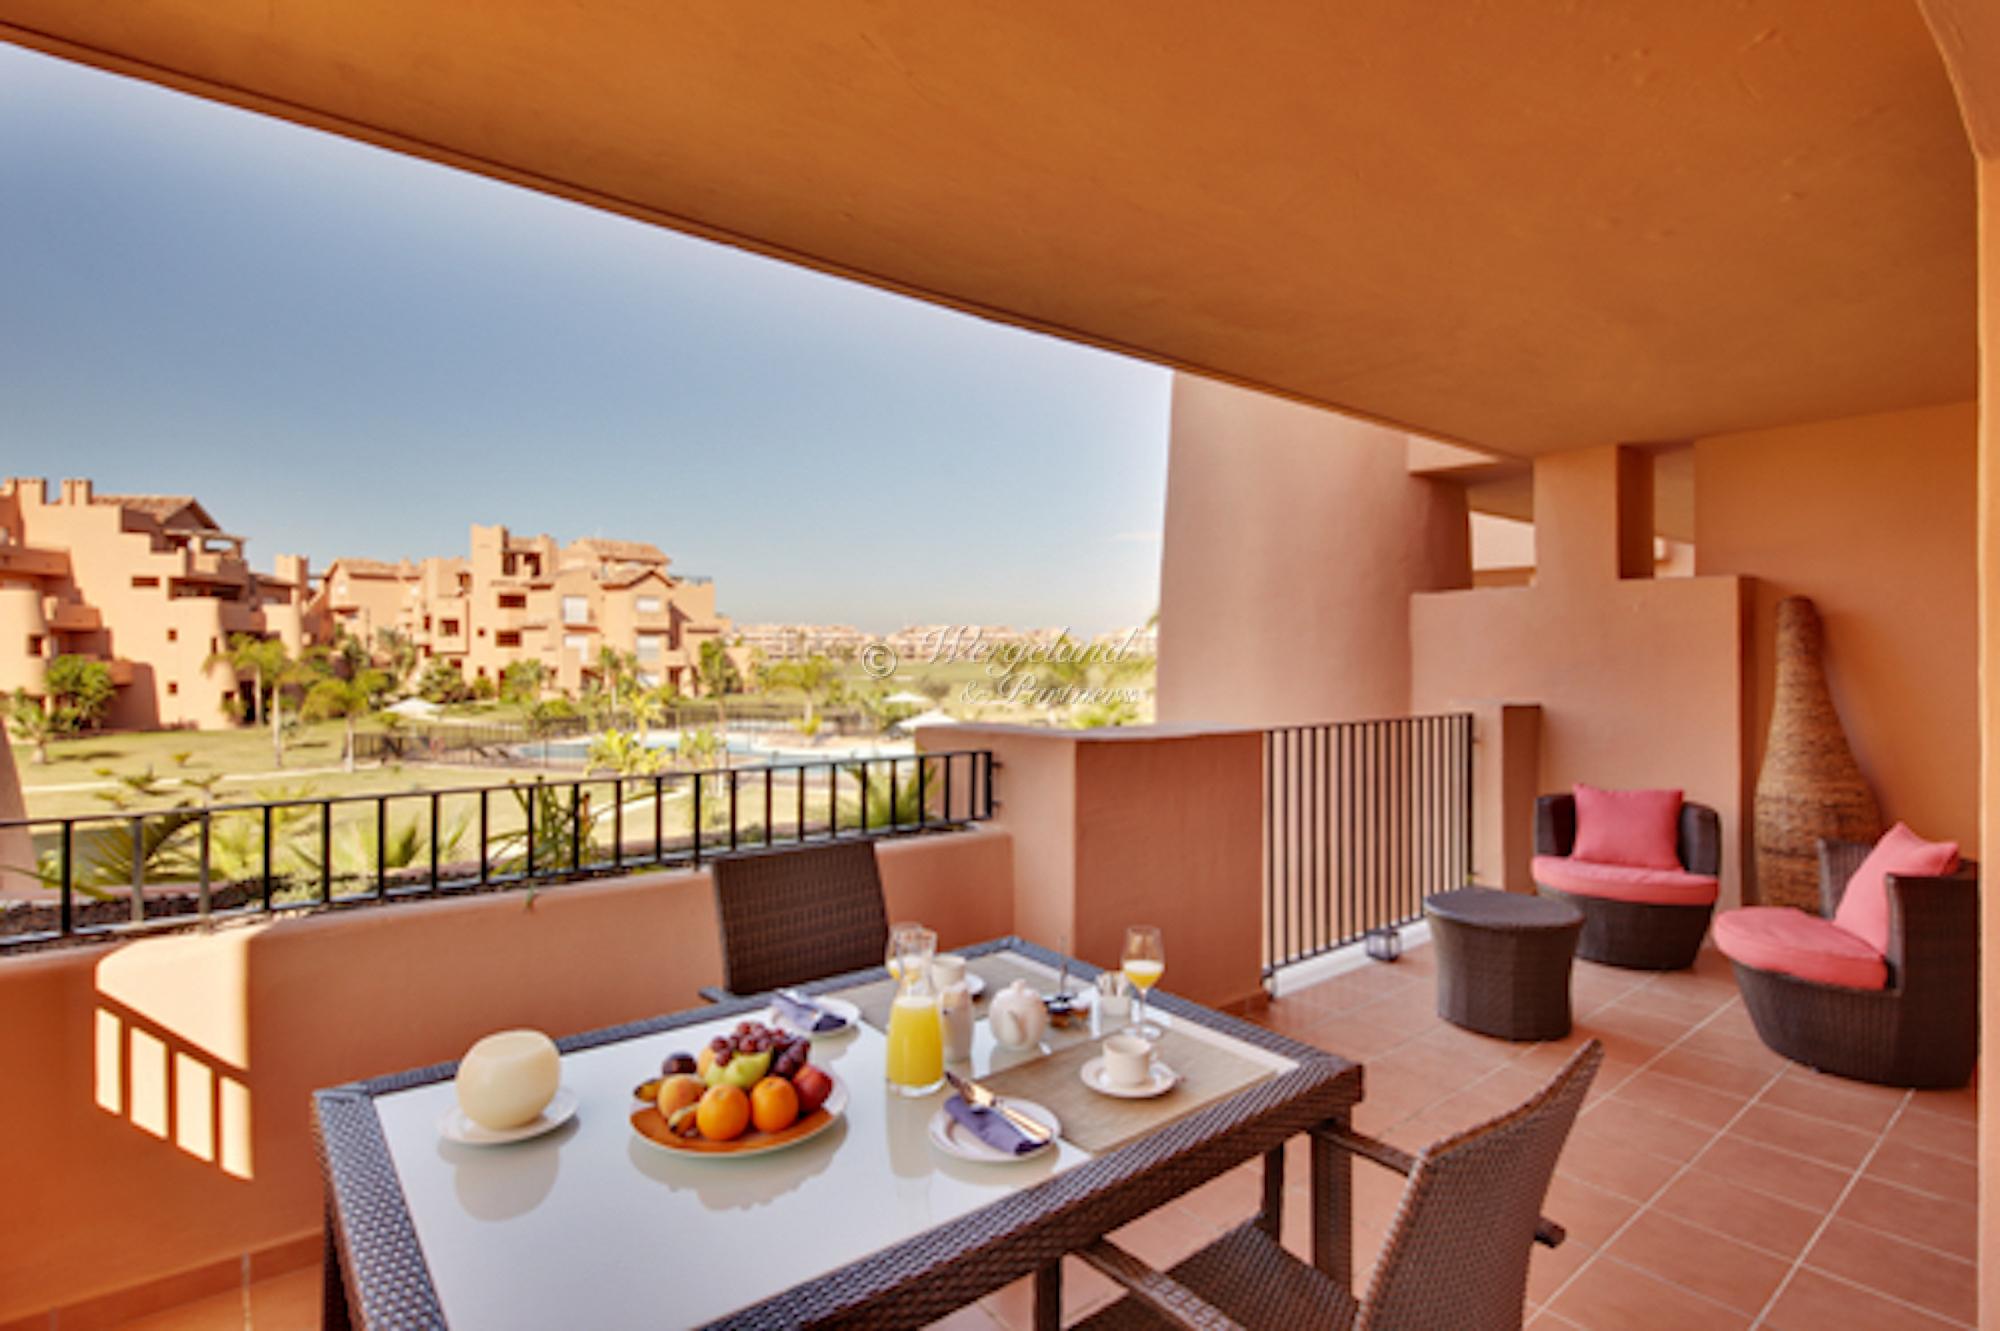 2 Bed/2 Bath furnished apartment. View pool/golf [10921]